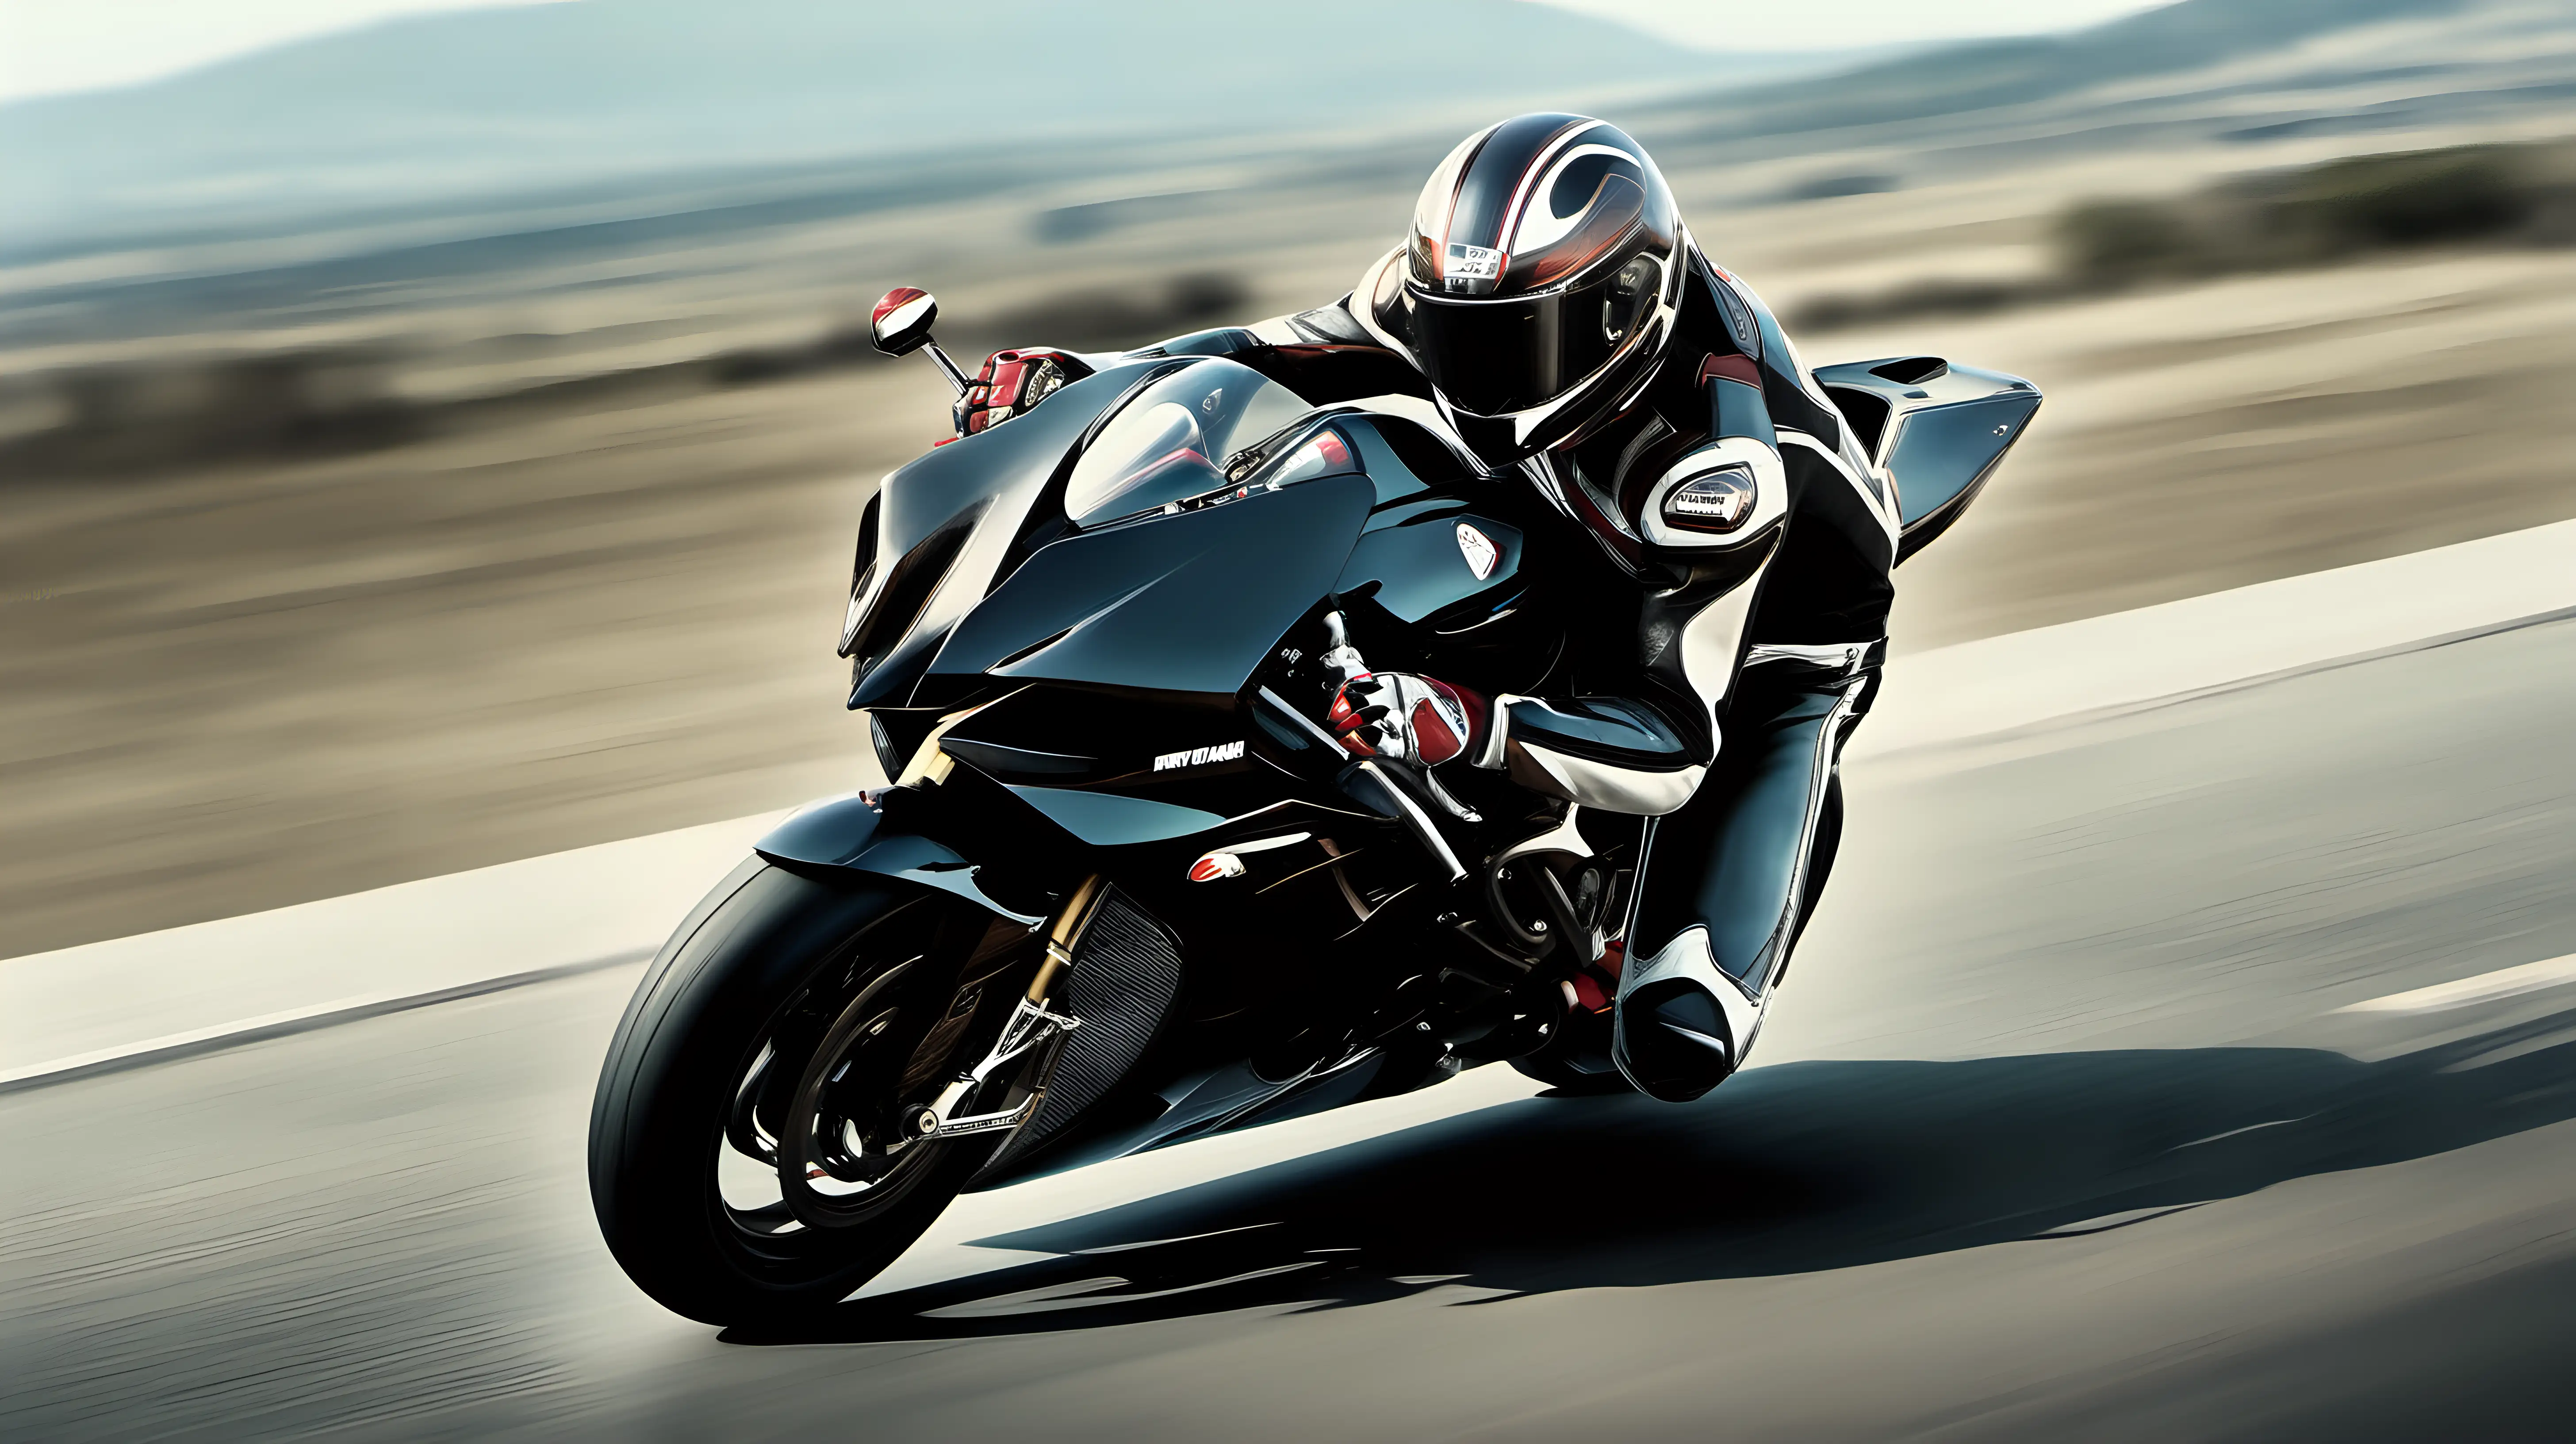 A high-octane image capturing a power bike and rider tearing down an open highway, the rider's sleek racing suit and helmet gleaming under the sun against a backdrop of expansive landscapes.